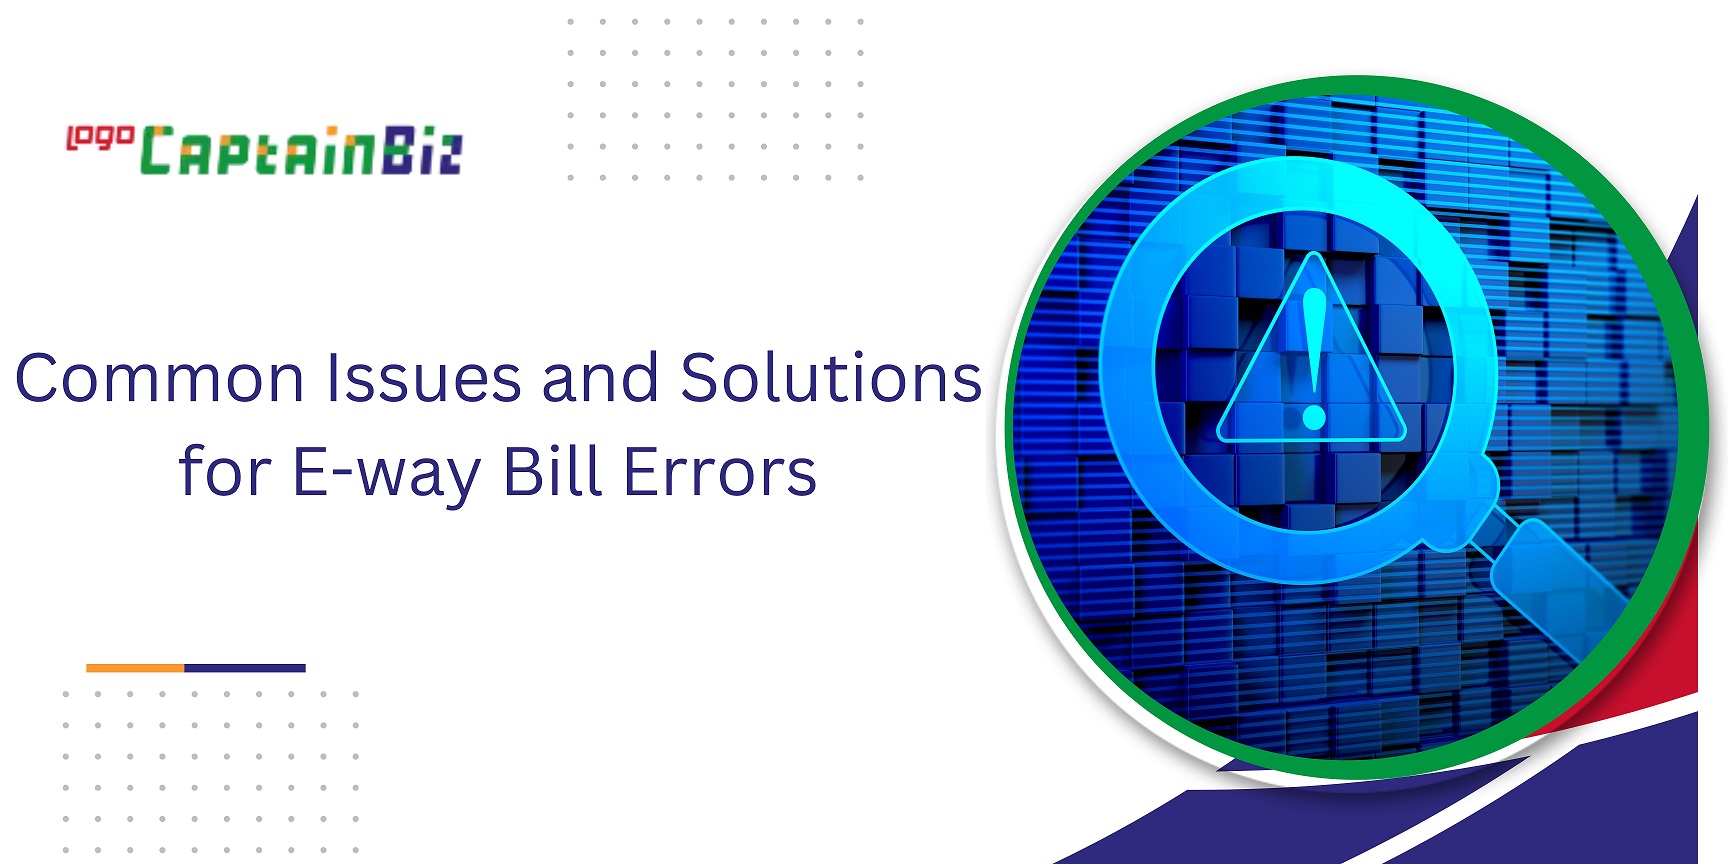 CaptainBiz: Common Issues and Solutions for E-way Bill Errors